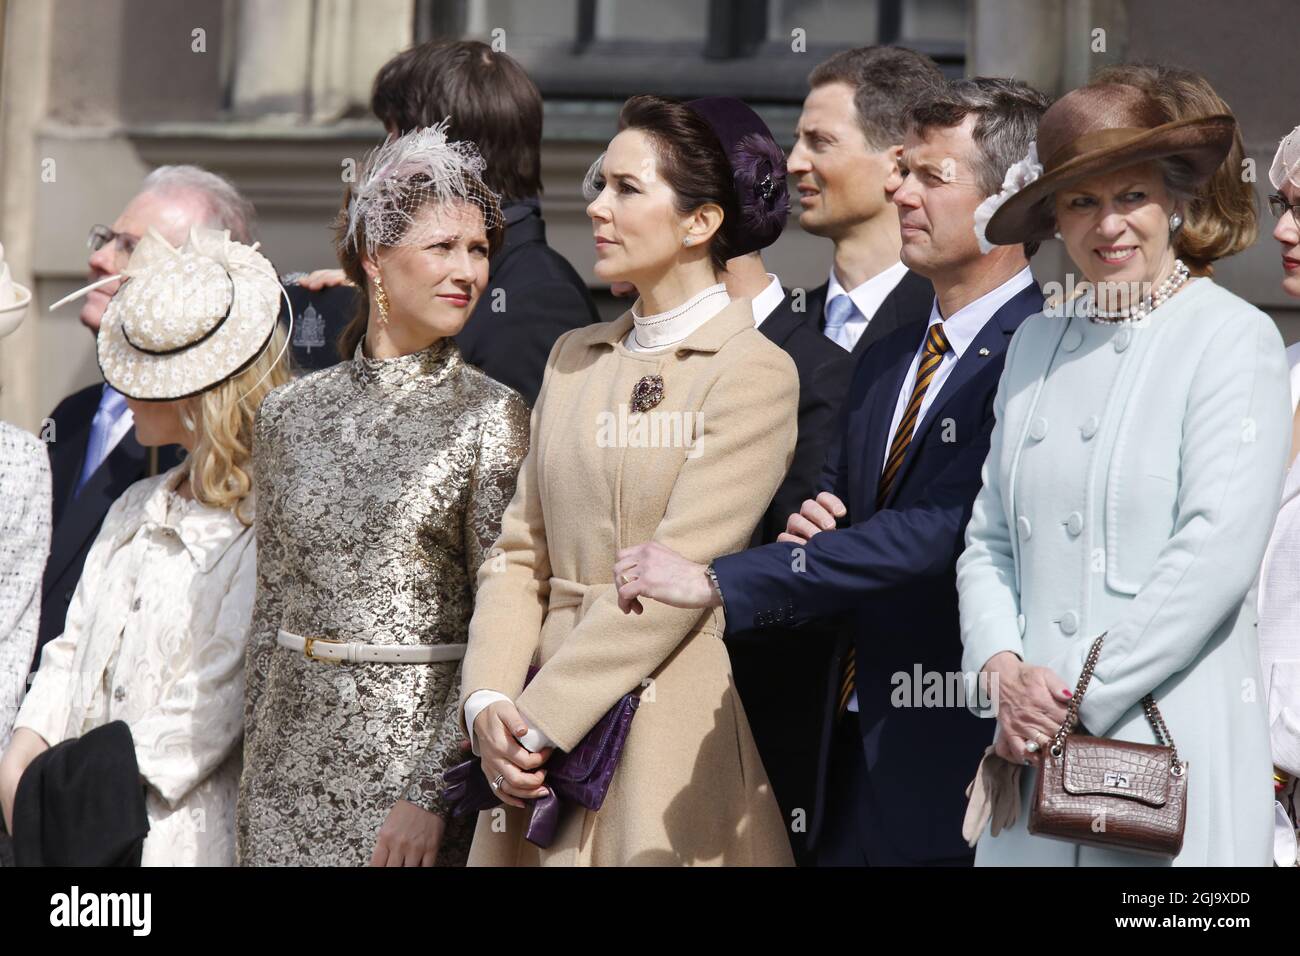 STOCKHOLM 2016-04-30 Princess Martha Louise, Crown Princess Mary, Crown Prince Frederik and Princess Benedikte The King's birthday celebration on the Outer courtyard, The Royal Palace, Saturday, April 30, 2016. Photo: Christine Olsson / TT / code 10430  Stock Photo